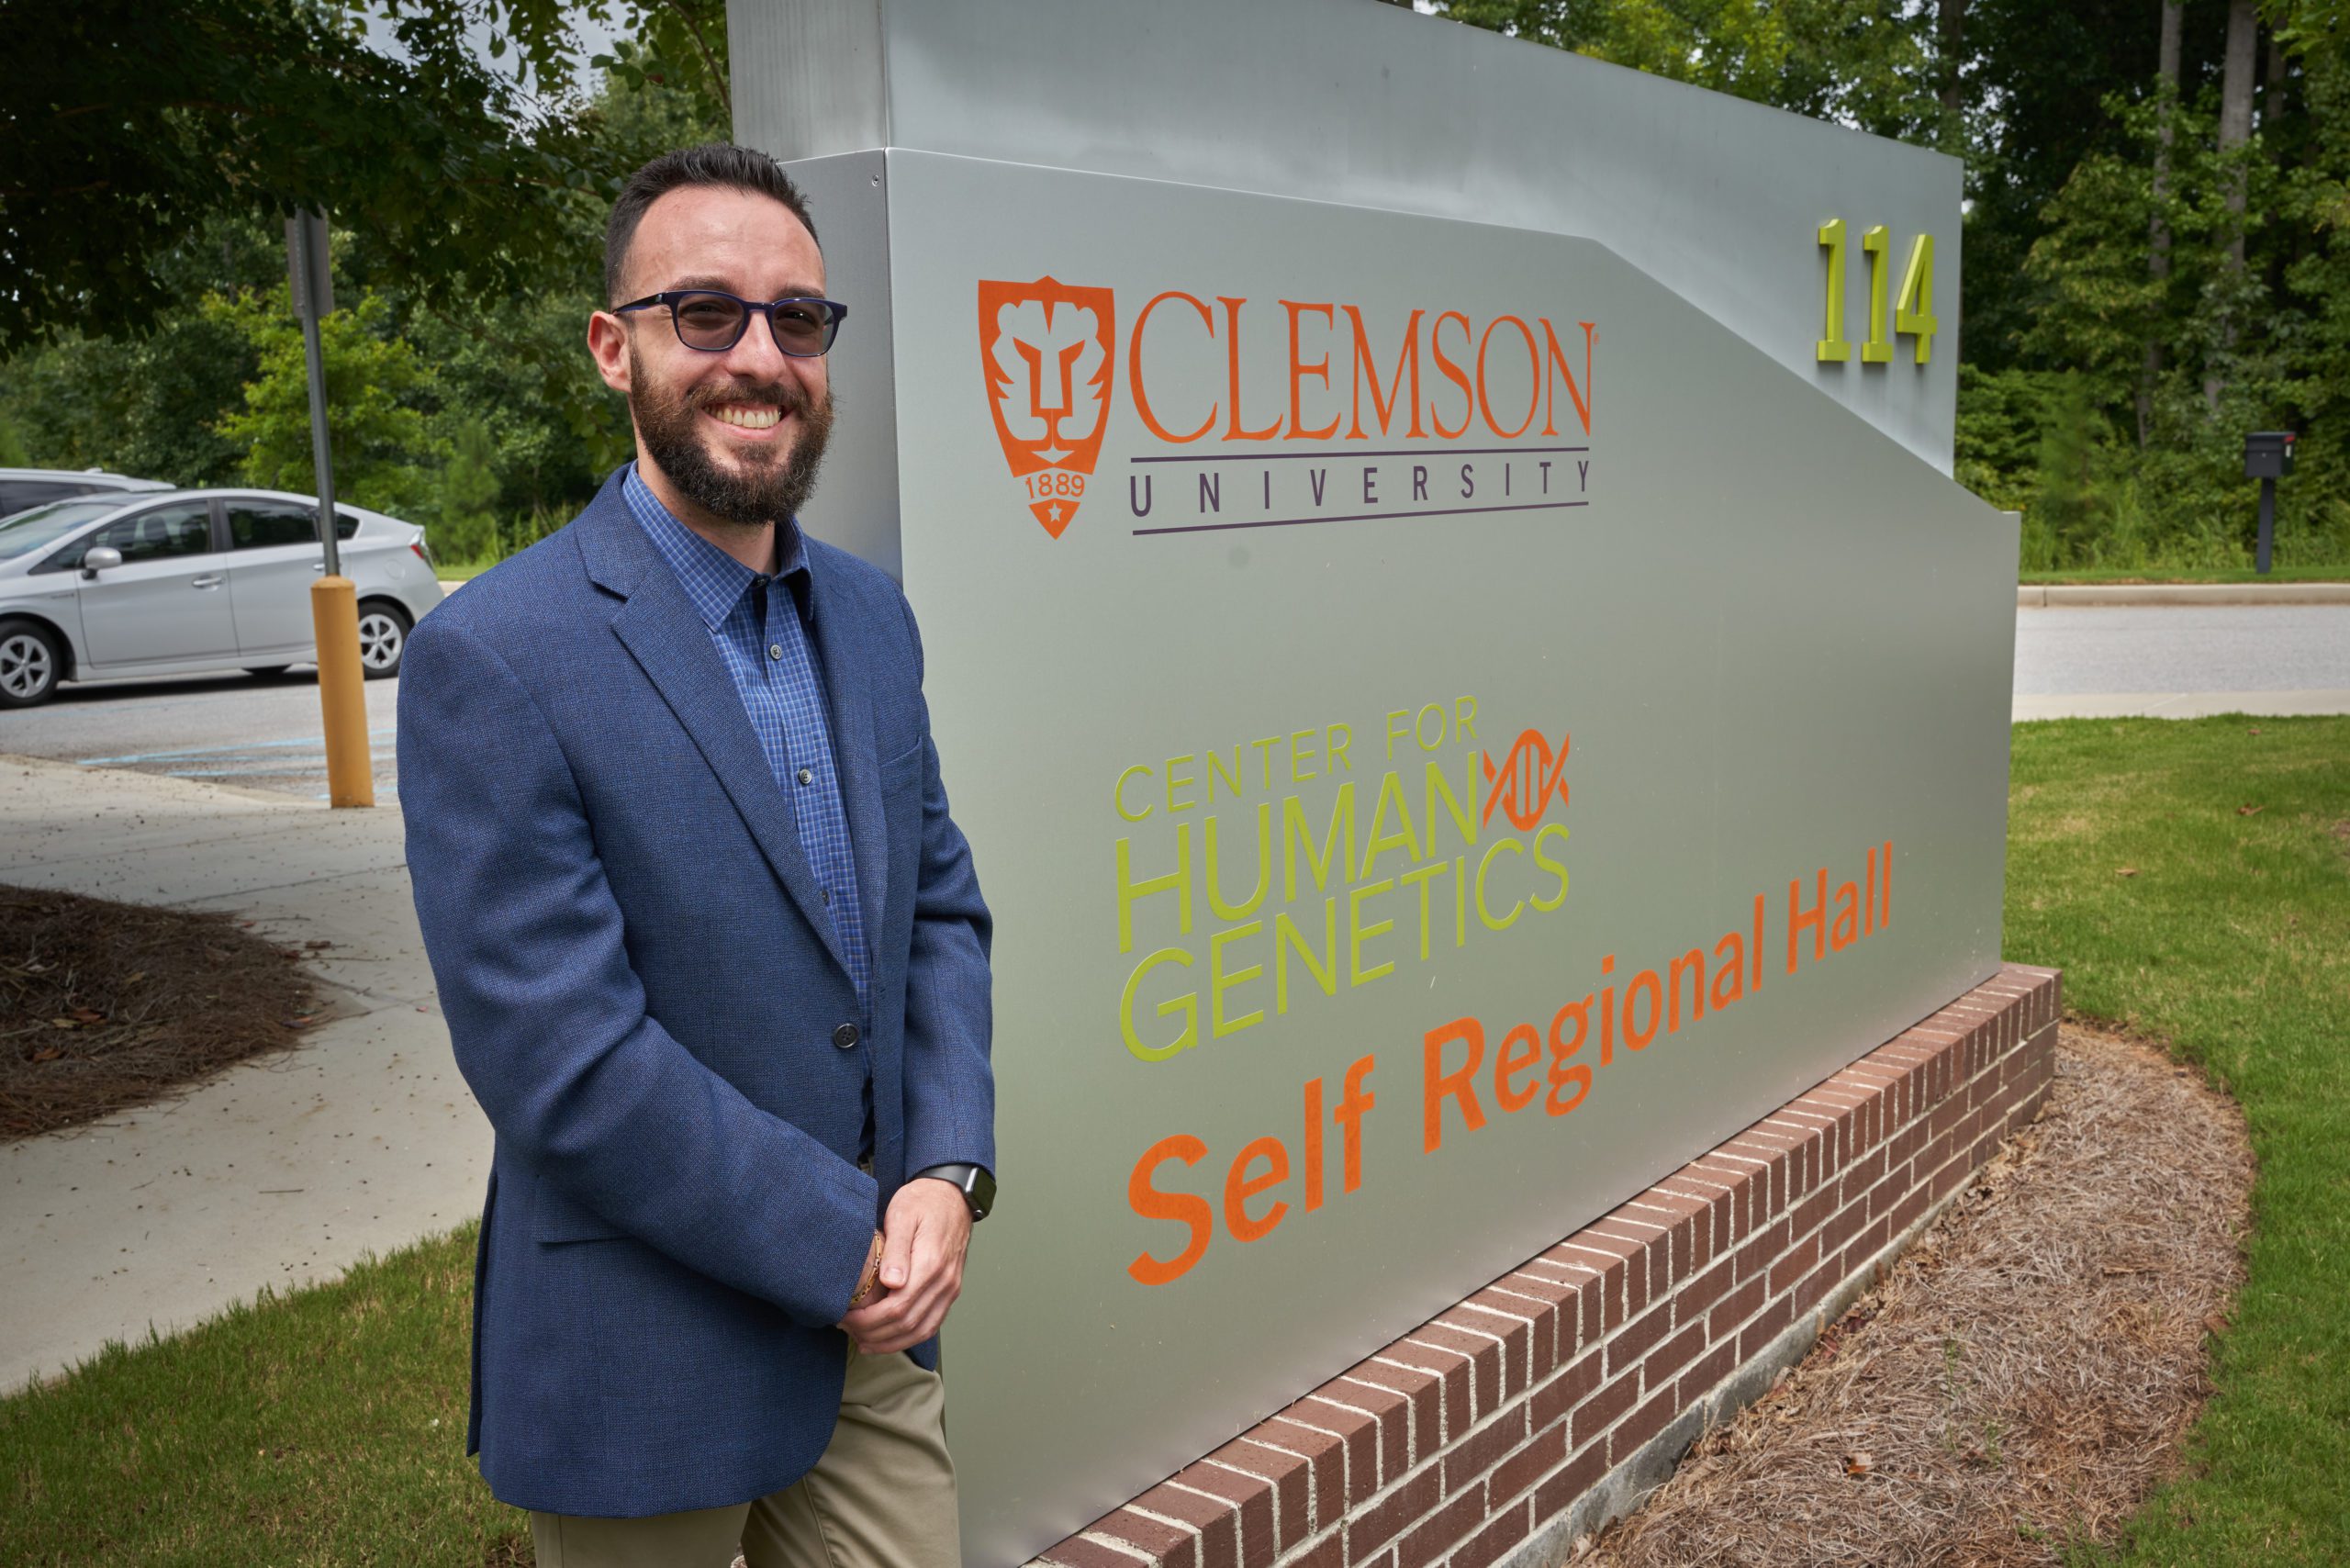 Man wearing a suit and sunglasses stands in front of a sign at the Clemson University Center for Human Genetics.